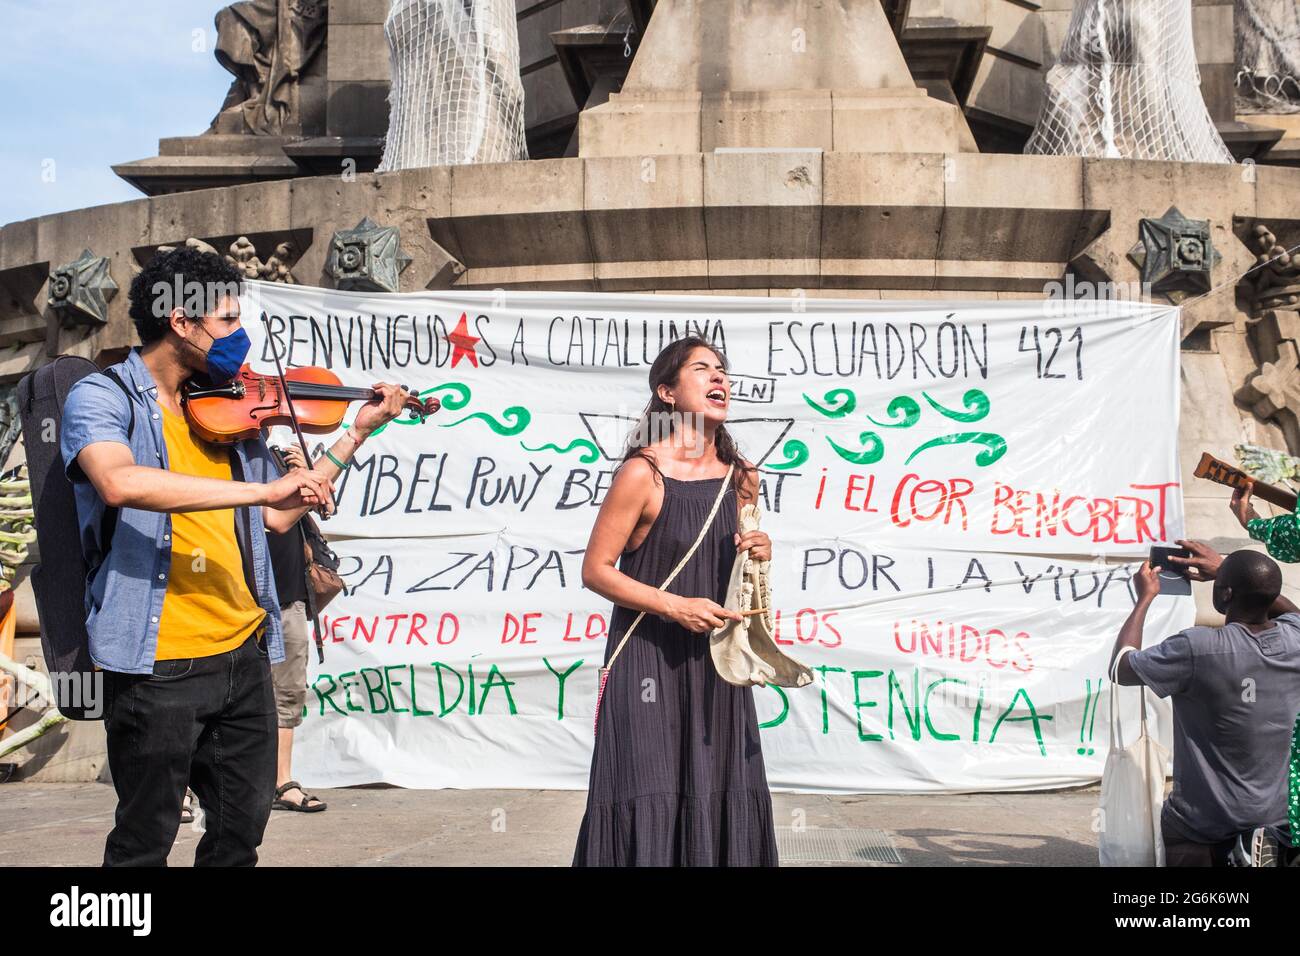 Barcelona, Spain. 06th July, 2021. People playing musical instruments in front of the Columbus Monument, during the event.Barcelona welcomes the 421 Squadron of the Zapatista Army of National Liberation (EZLN), a libertarian socialist political and militant group of Mexico, on their way through Europe. Composed of different members. The 421 Squad has been received at the Columbus Monument by local collectives and social organizations. Credit: SOPA Images Limited/Alamy Live News Stock Photo